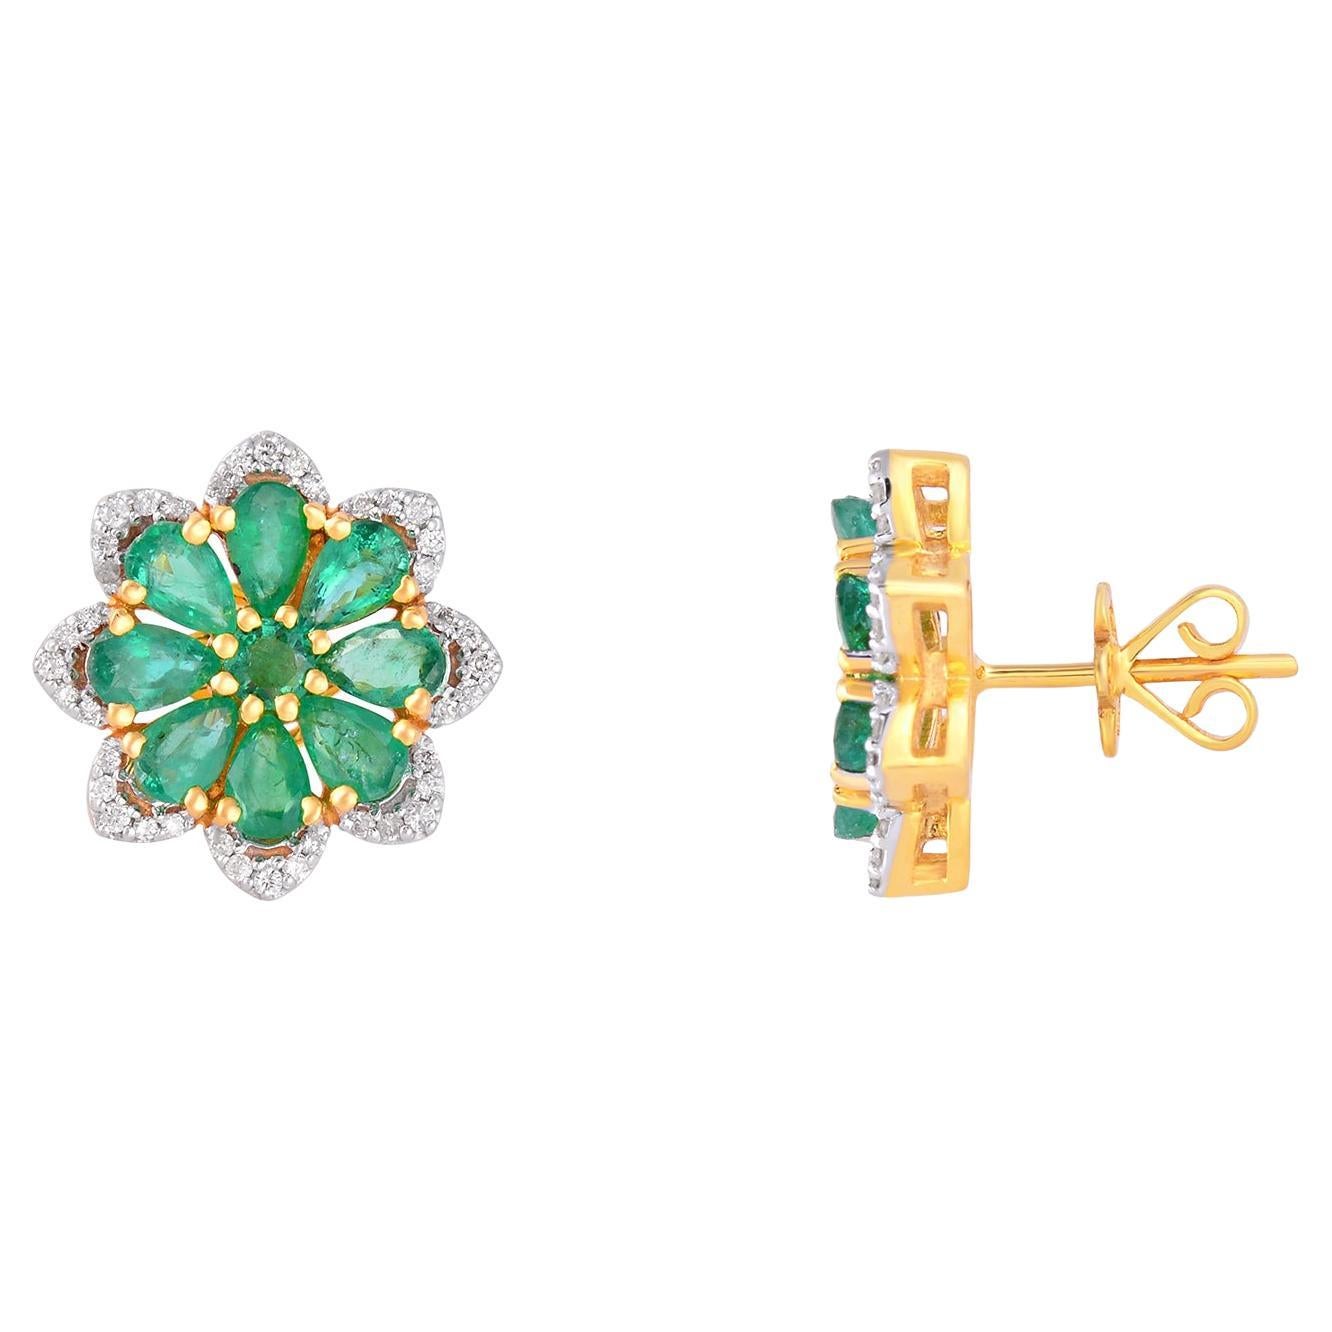 Emerald Stud Earrings with Diamond in 14k Gold For Sale